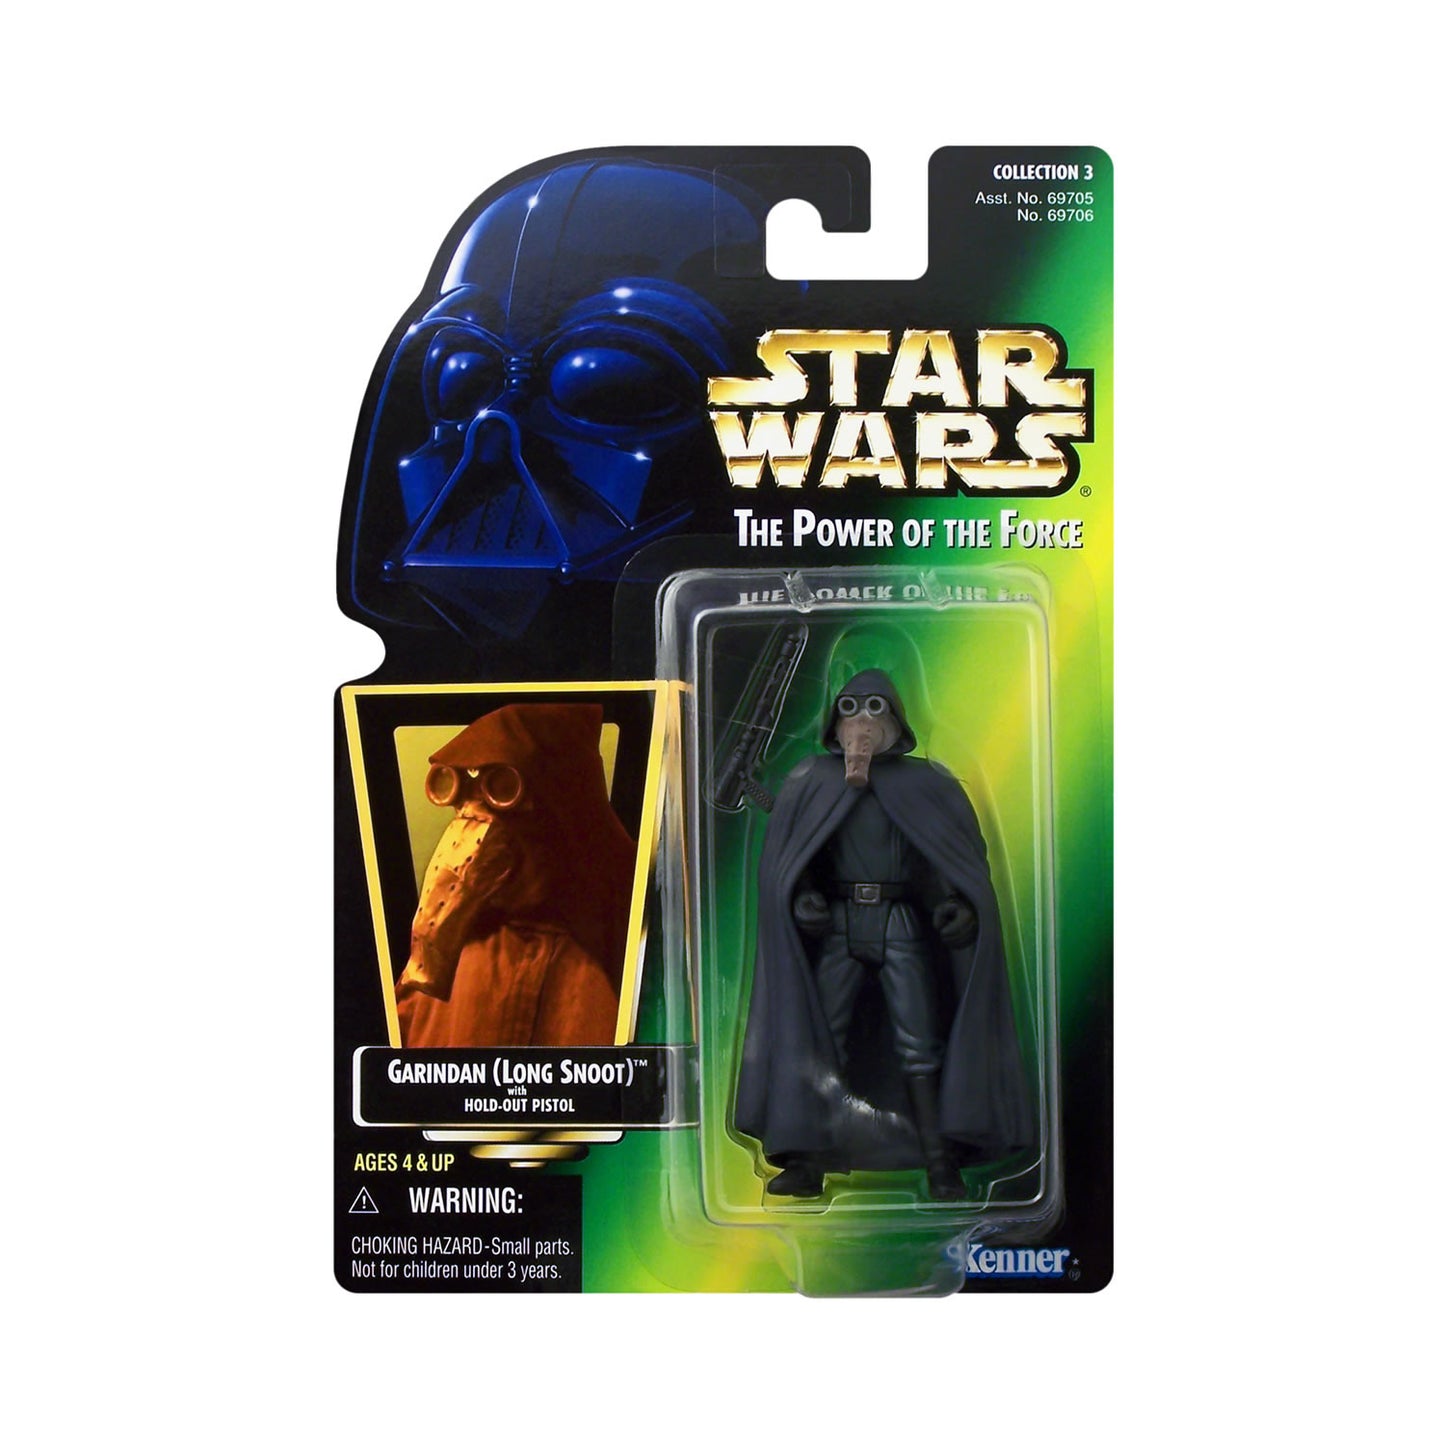 Star Wars: Power of the Force Garindan (Long Snoot) (Hologram Card) 3.75-Inch Action Figure